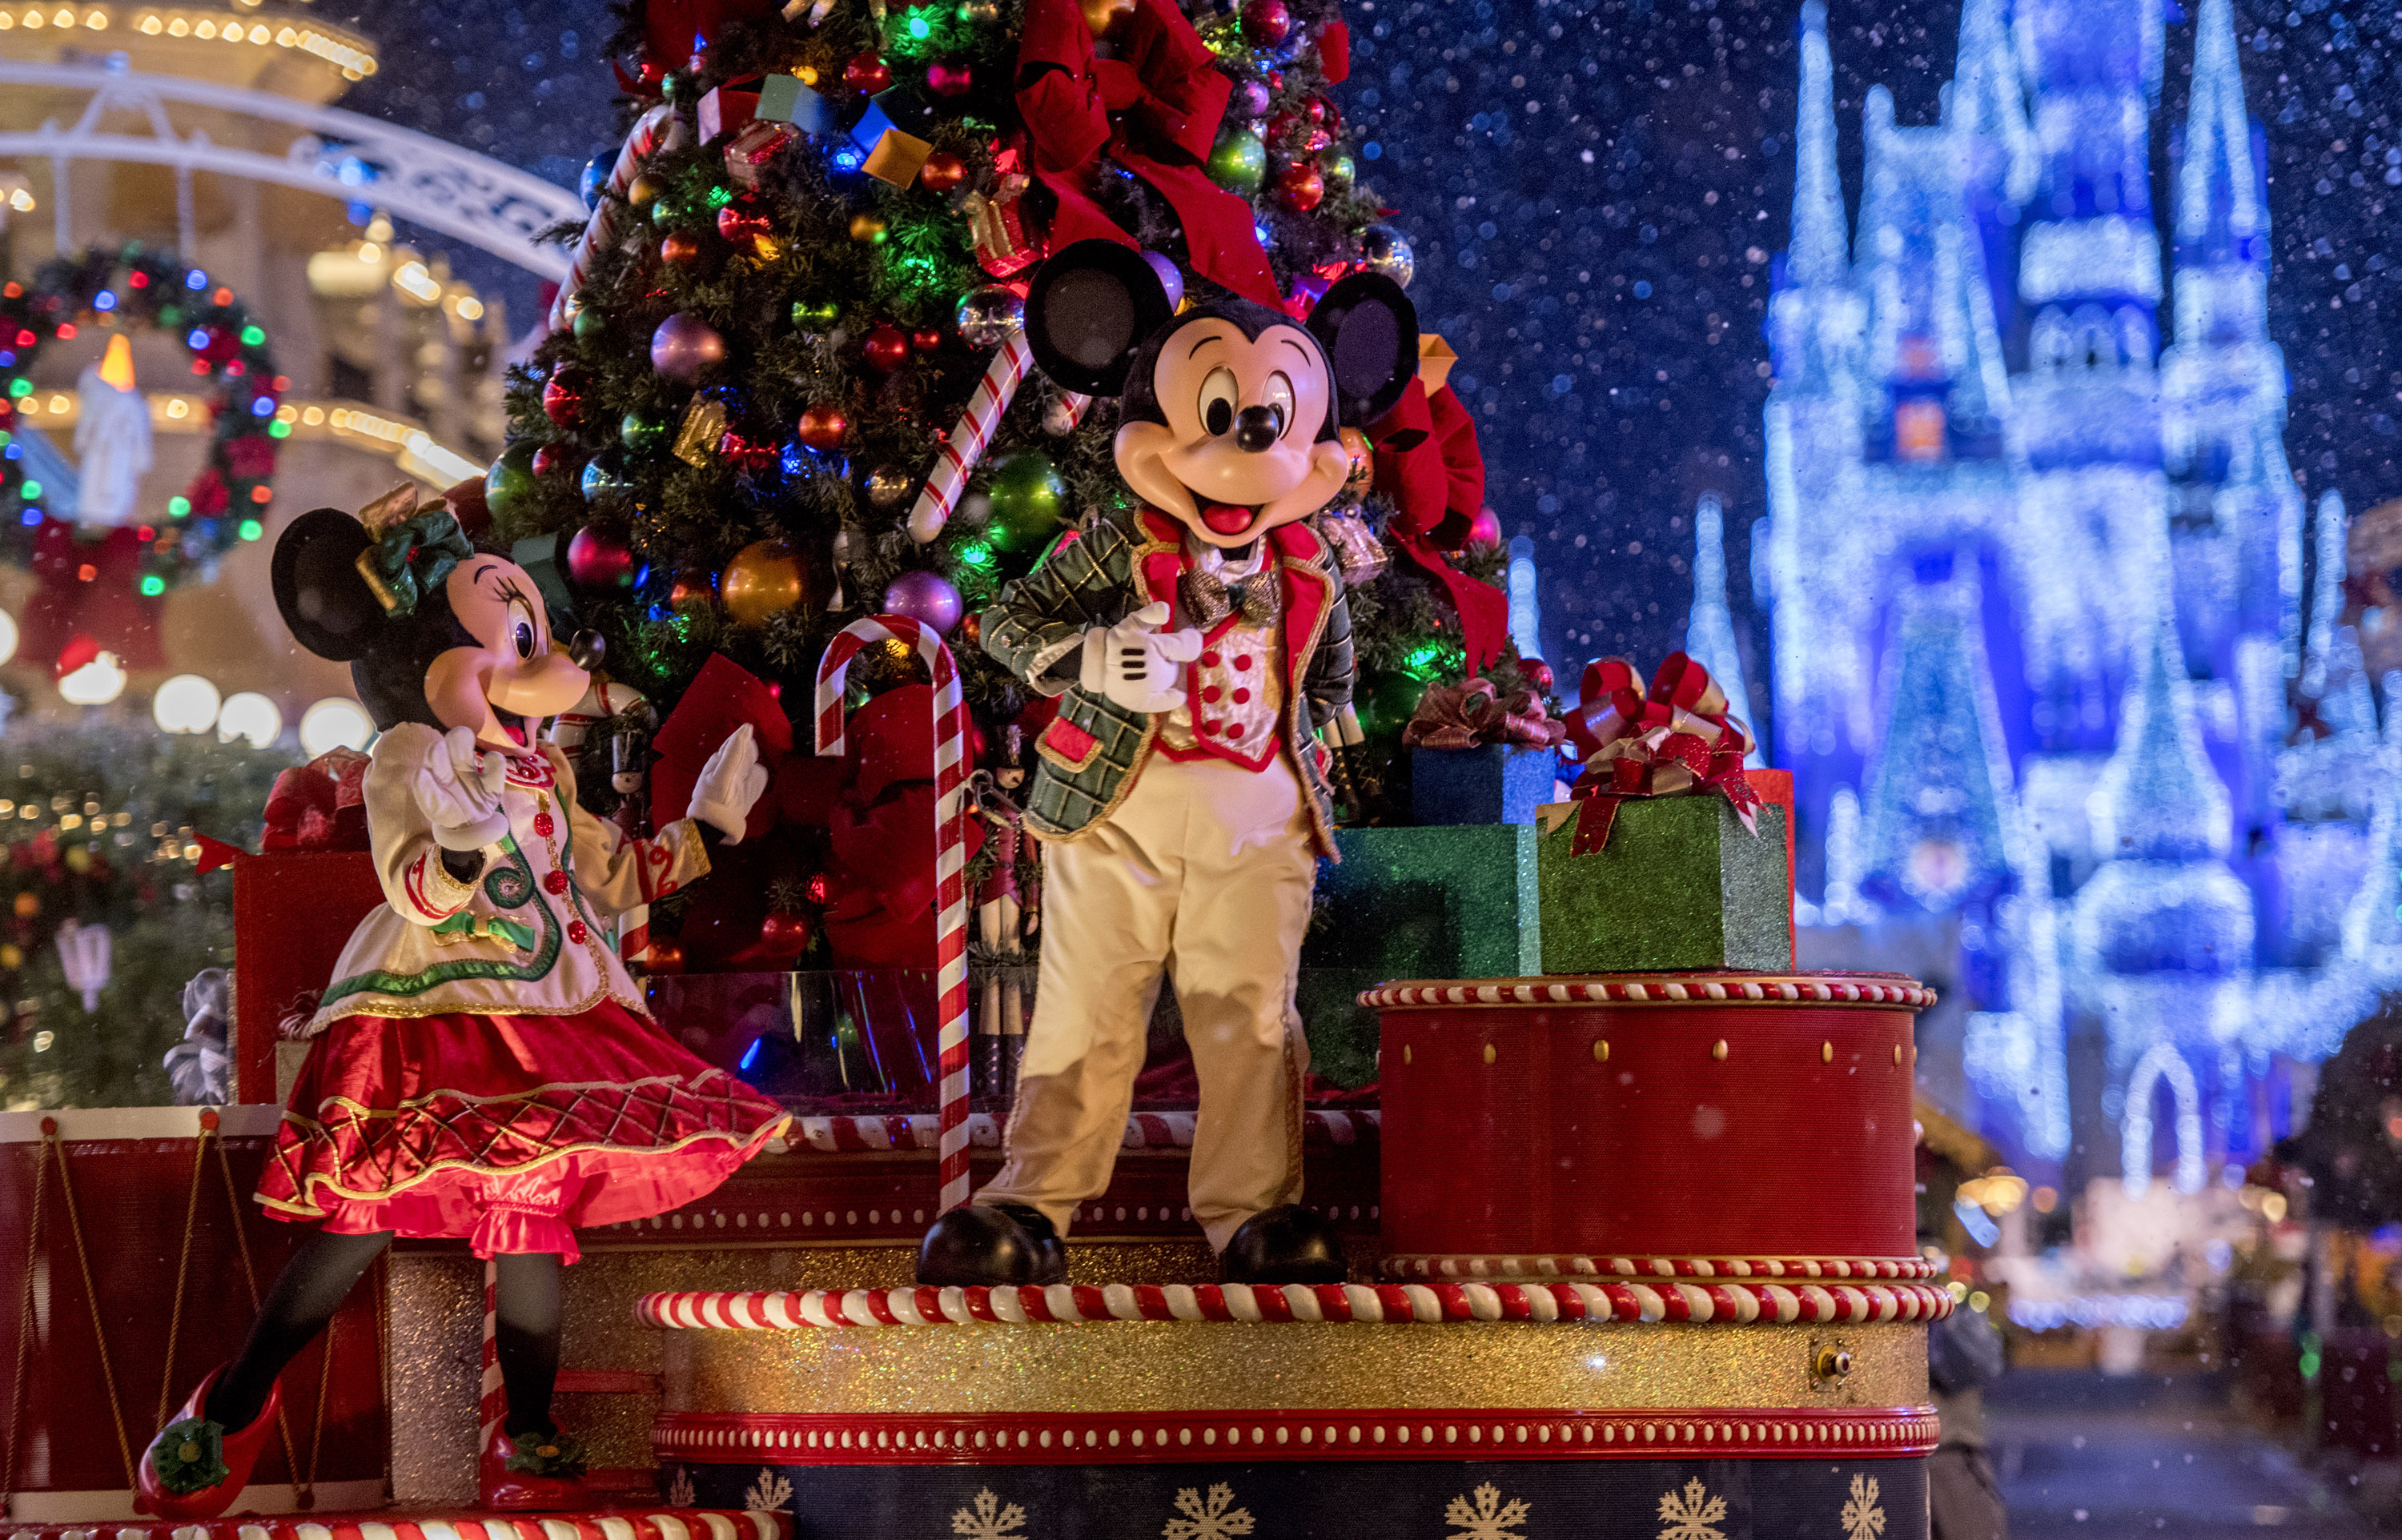 Experience the Spirit of the Season at Mickey’s Very Merry Christmas Party at Magic Kingdom Park